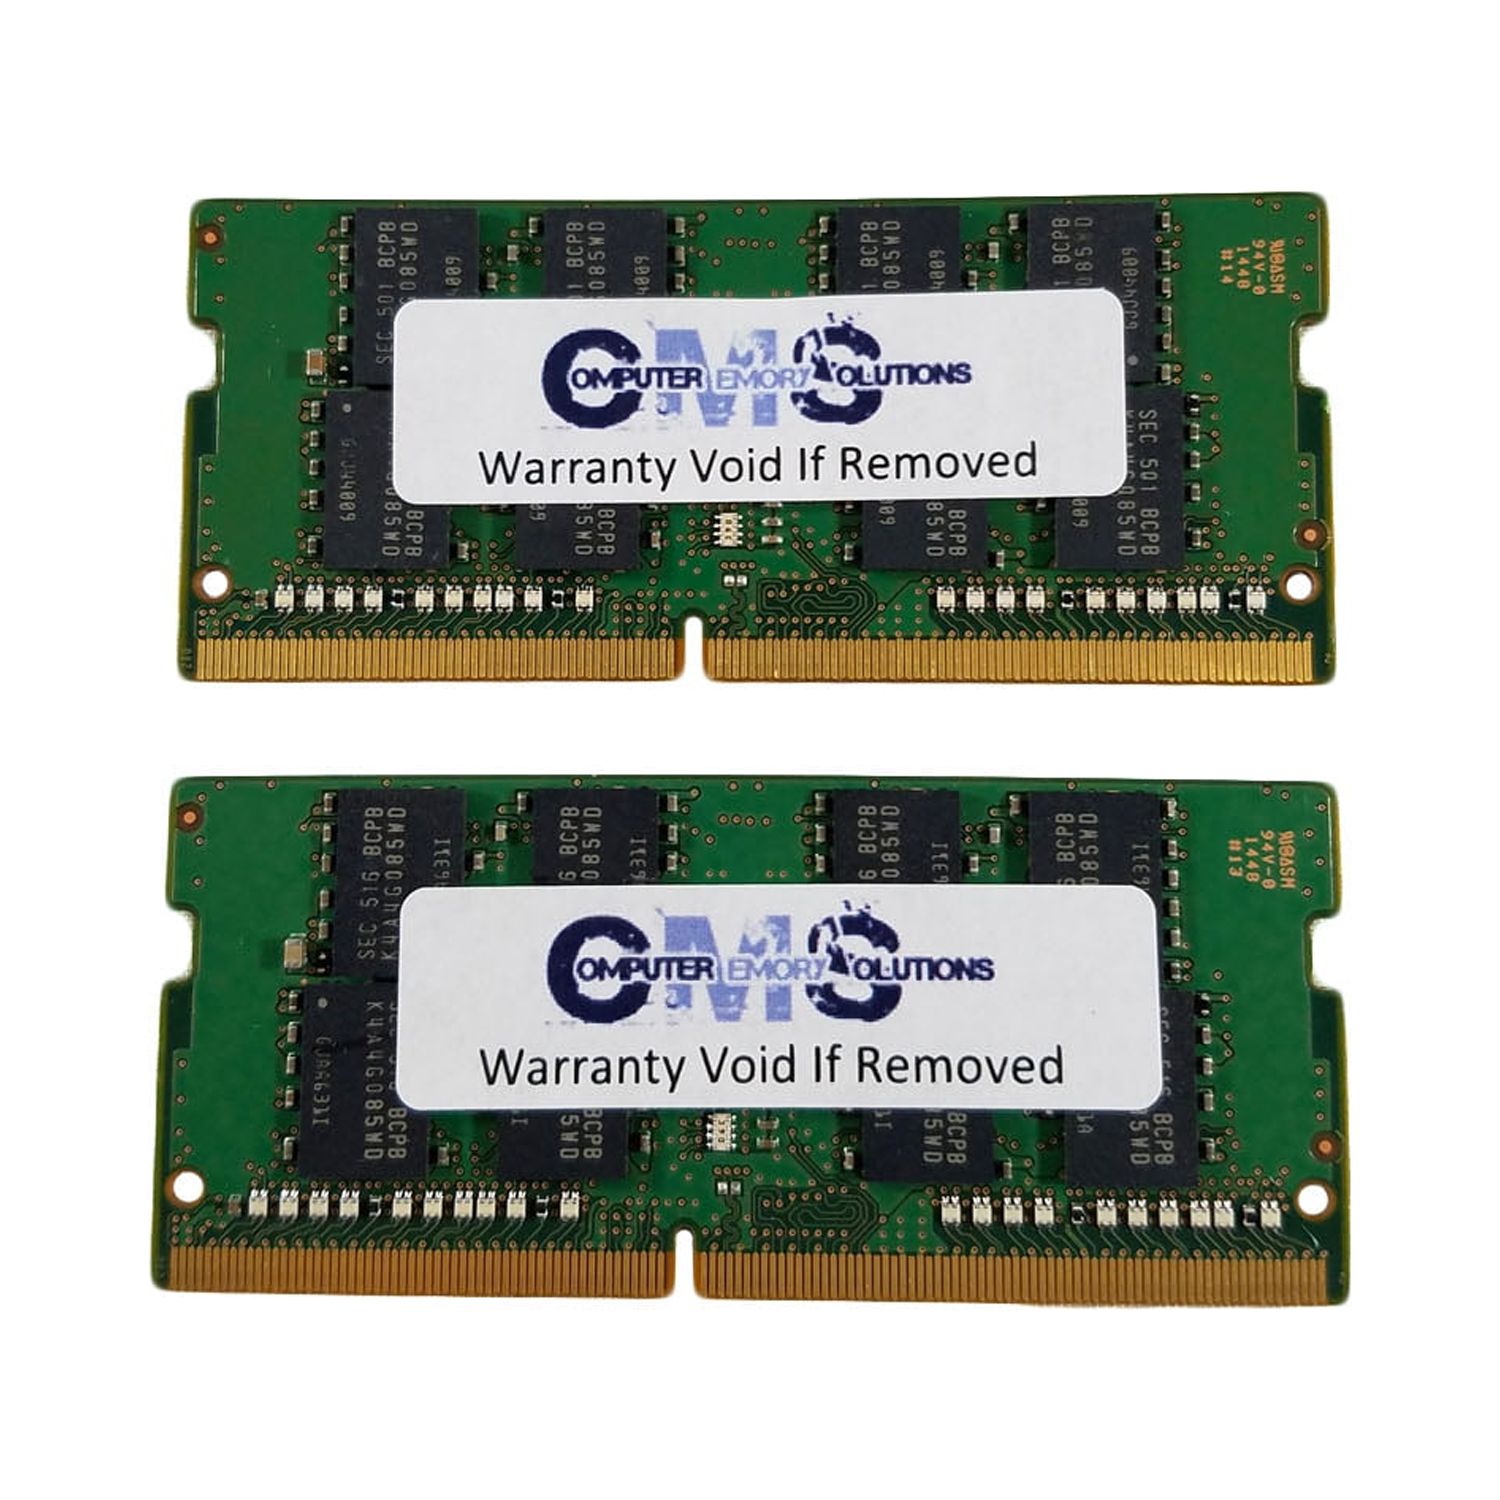 CMS 16GB (2X8GB) DDR4 19200 2400MHZ NON ECC SODIMM Memory Ram Upgrade Compatible with Gigabyte® Mini STX System BRIX BRIX GB-BKi5T-7200, GB-BKi7HA-7500, GB-BKi7HT-7500, GB-BKi7T-7500 - C109 - image 1 of 2